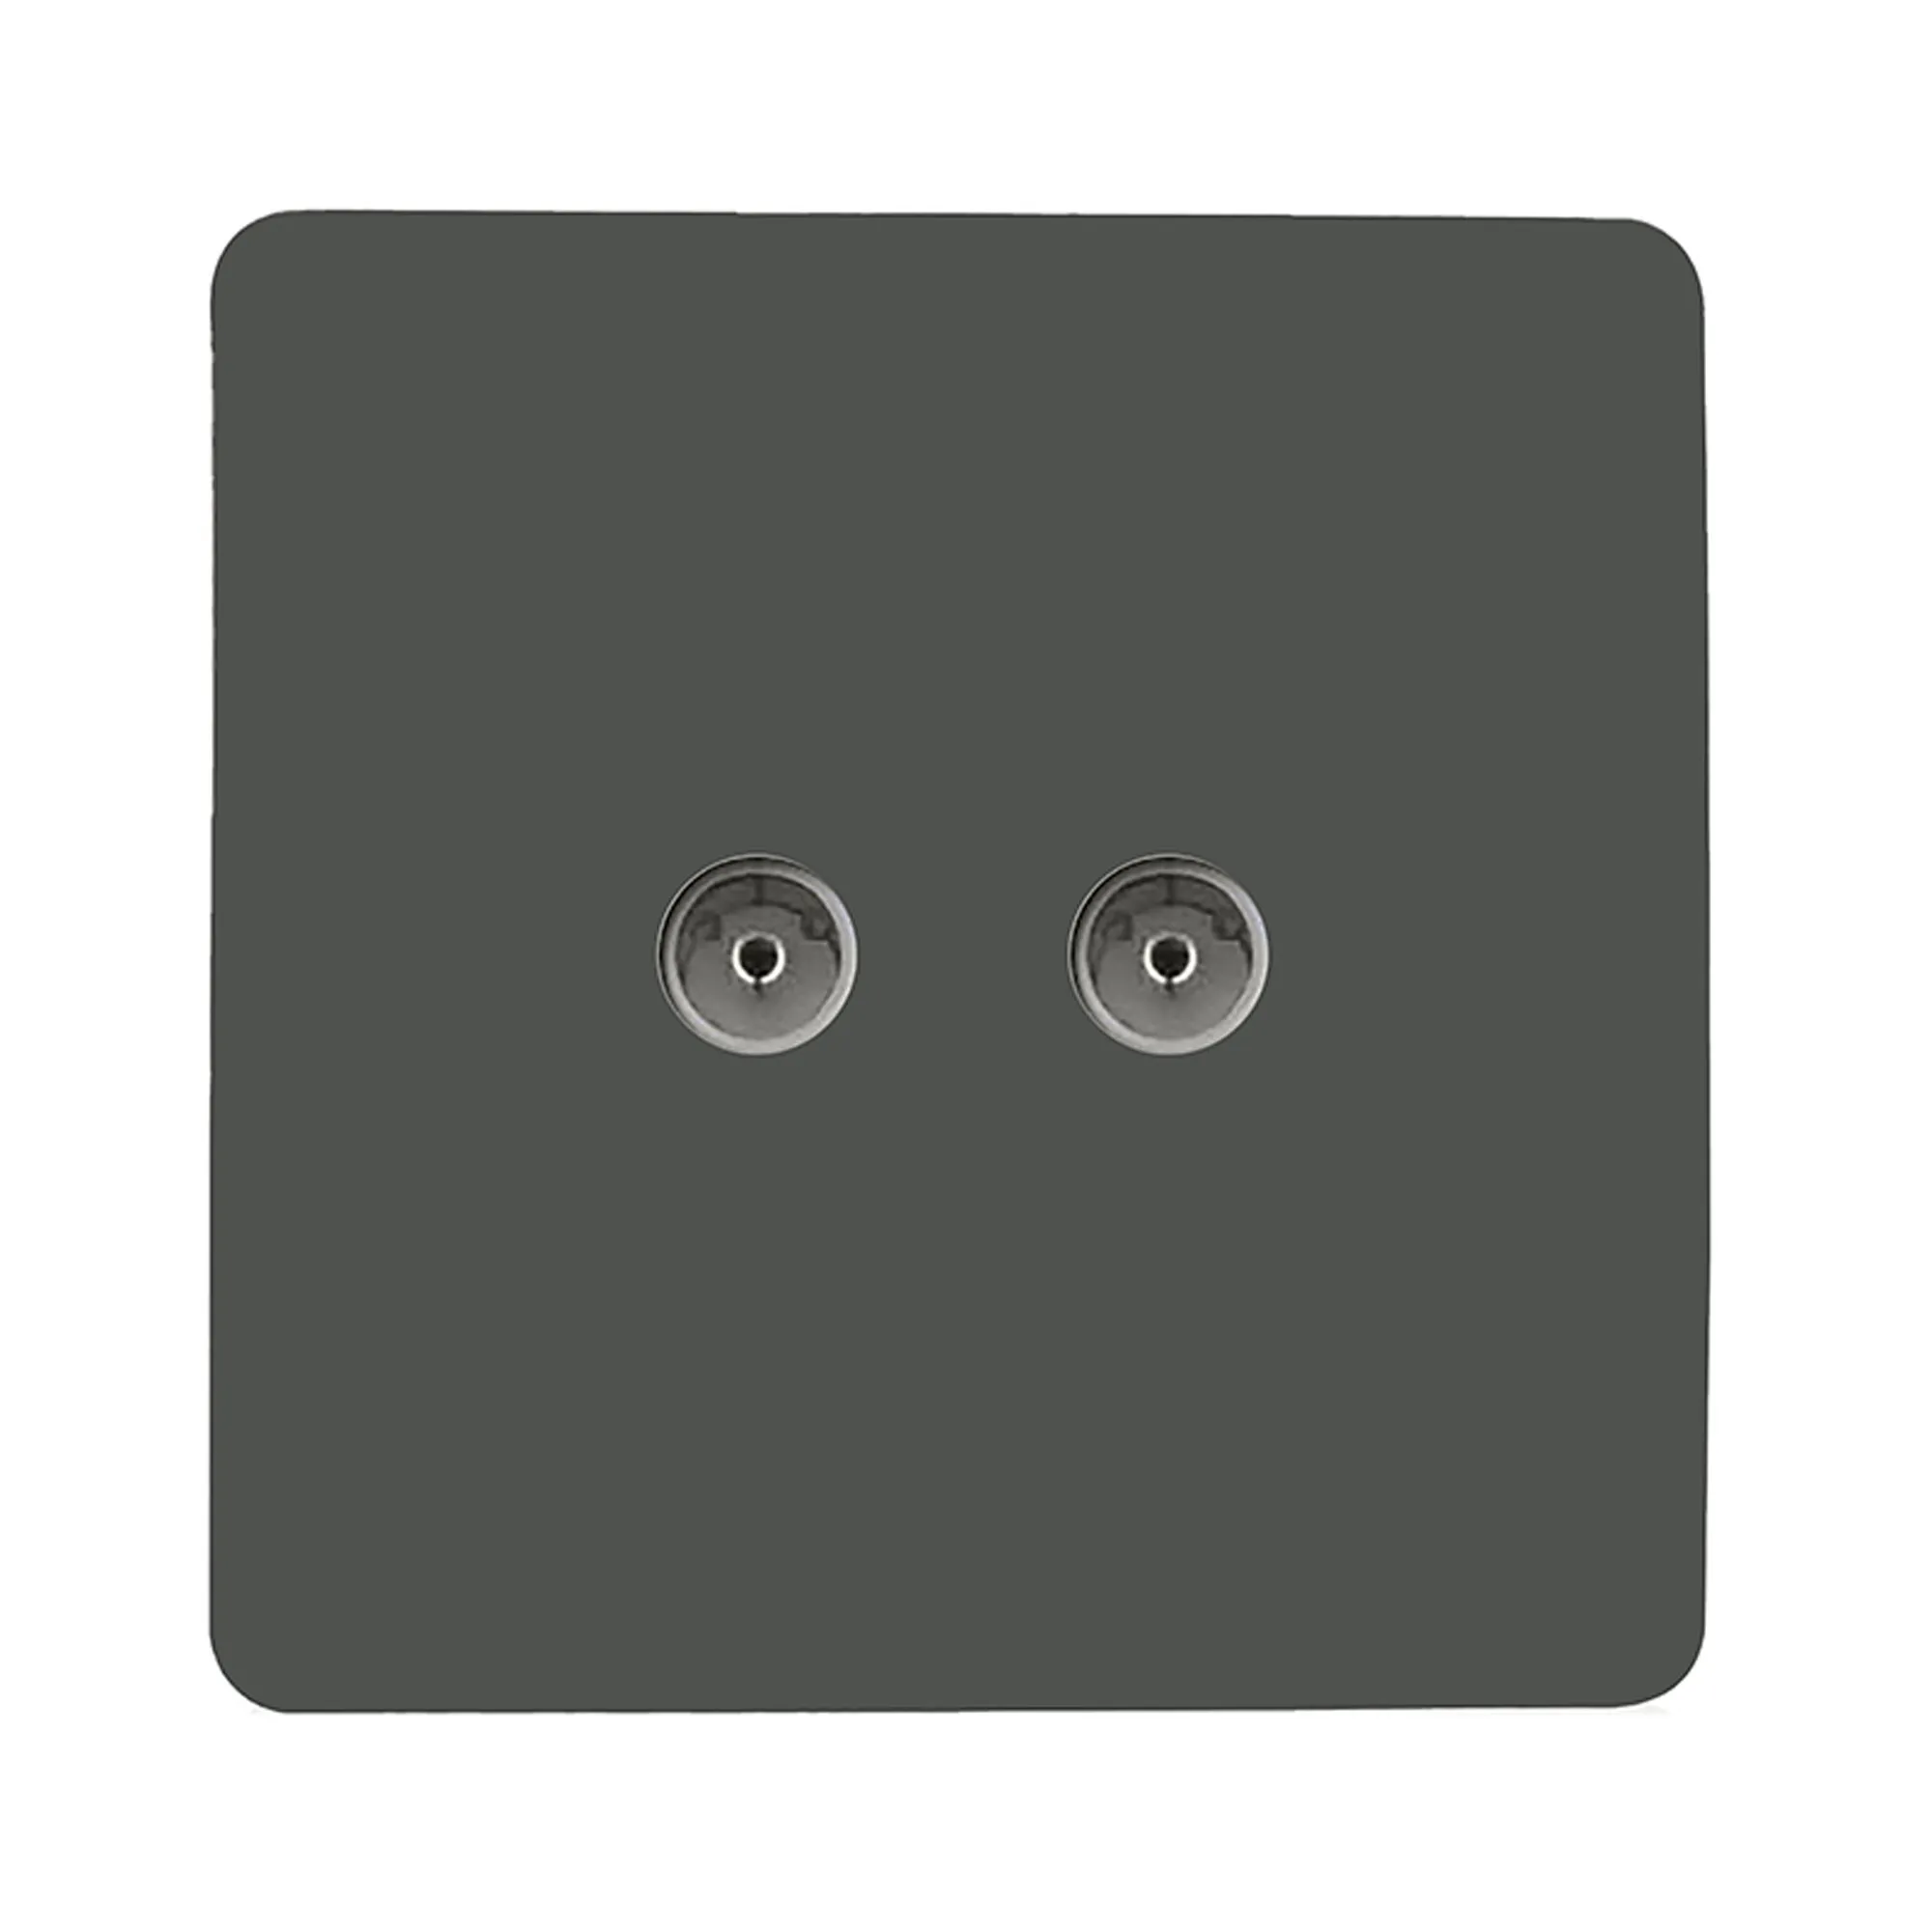 Twin TV Co-Axial Outlet Charcoal